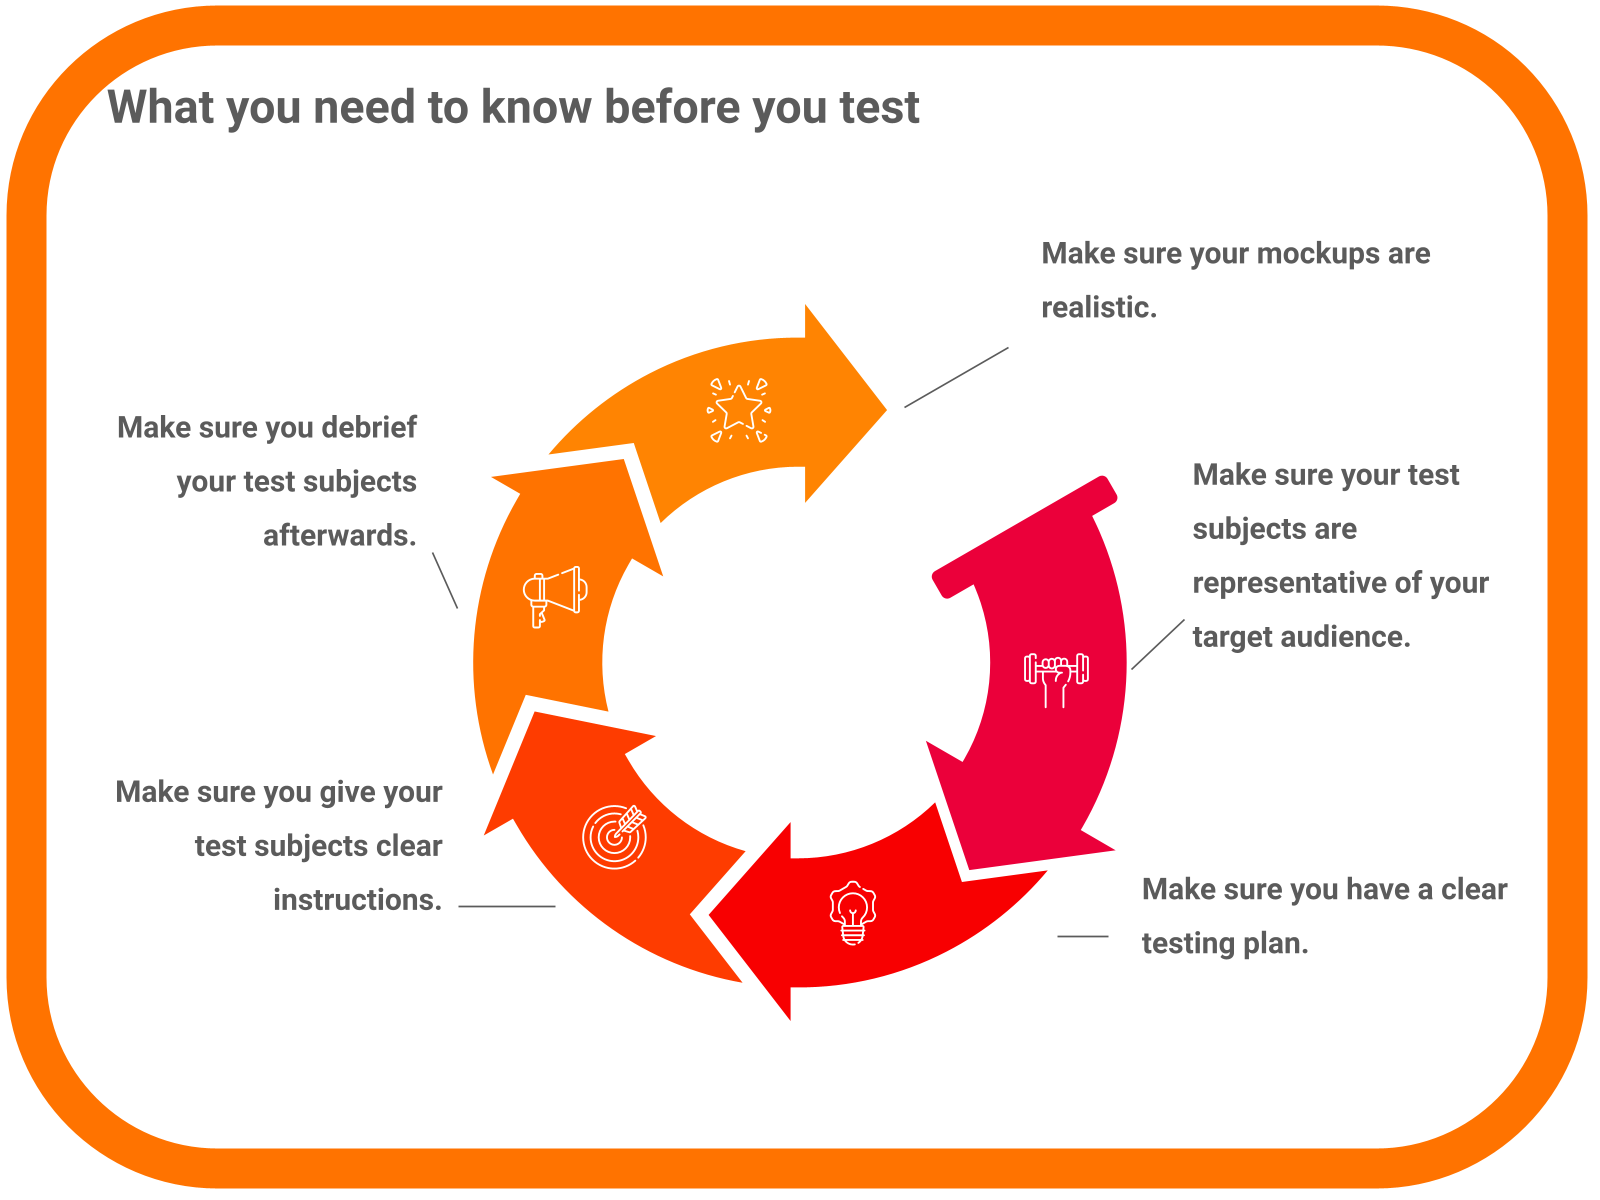 What you need to know before you test